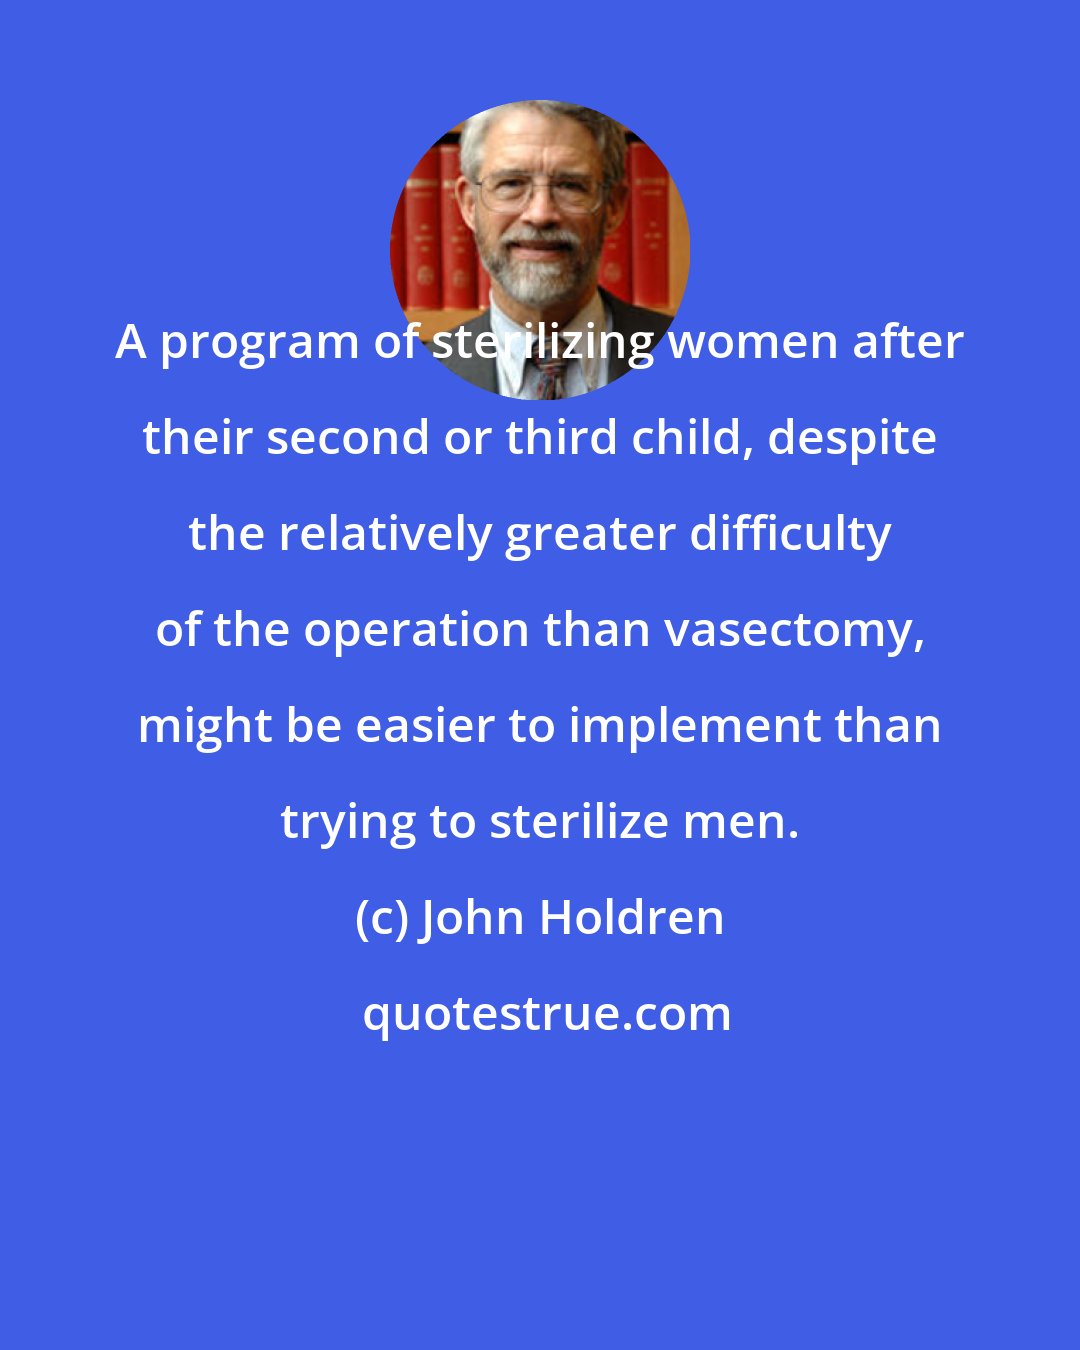 John Holdren: A program of sterilizing women after their second or third child, despite the relatively greater difficulty of the operation than vasectomy, might be easier to implement than trying to sterilize men.